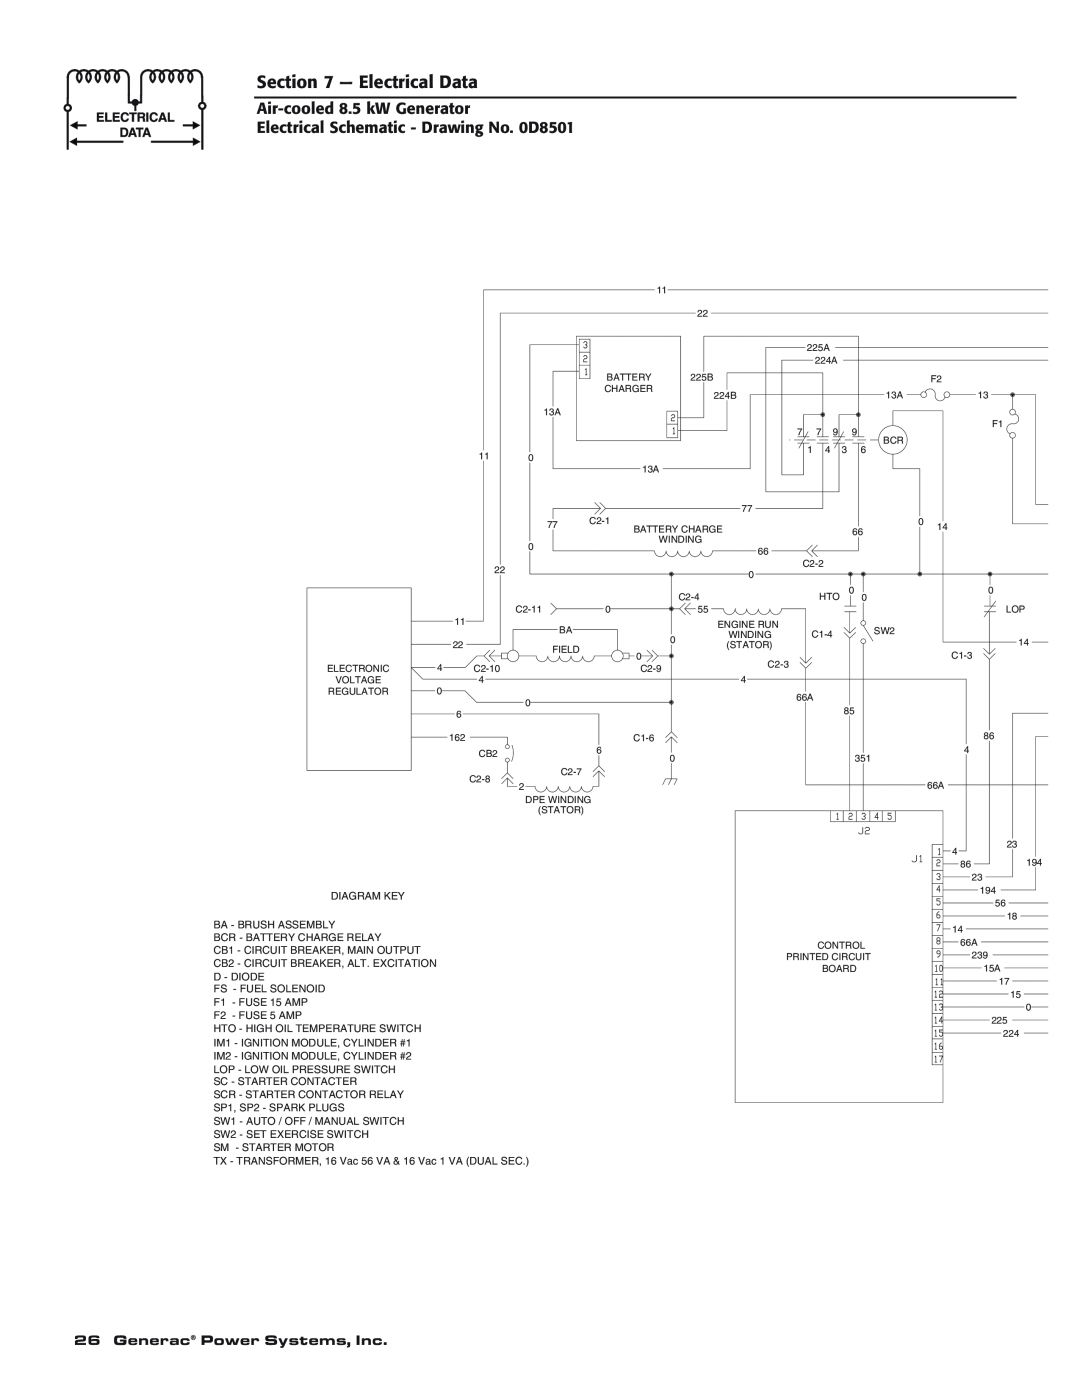 Generac 004692-0 owner manual Electrical Data, Air-cooled8.5 kW Generator, Electrical Schematic - Drawing No. 0D8501 